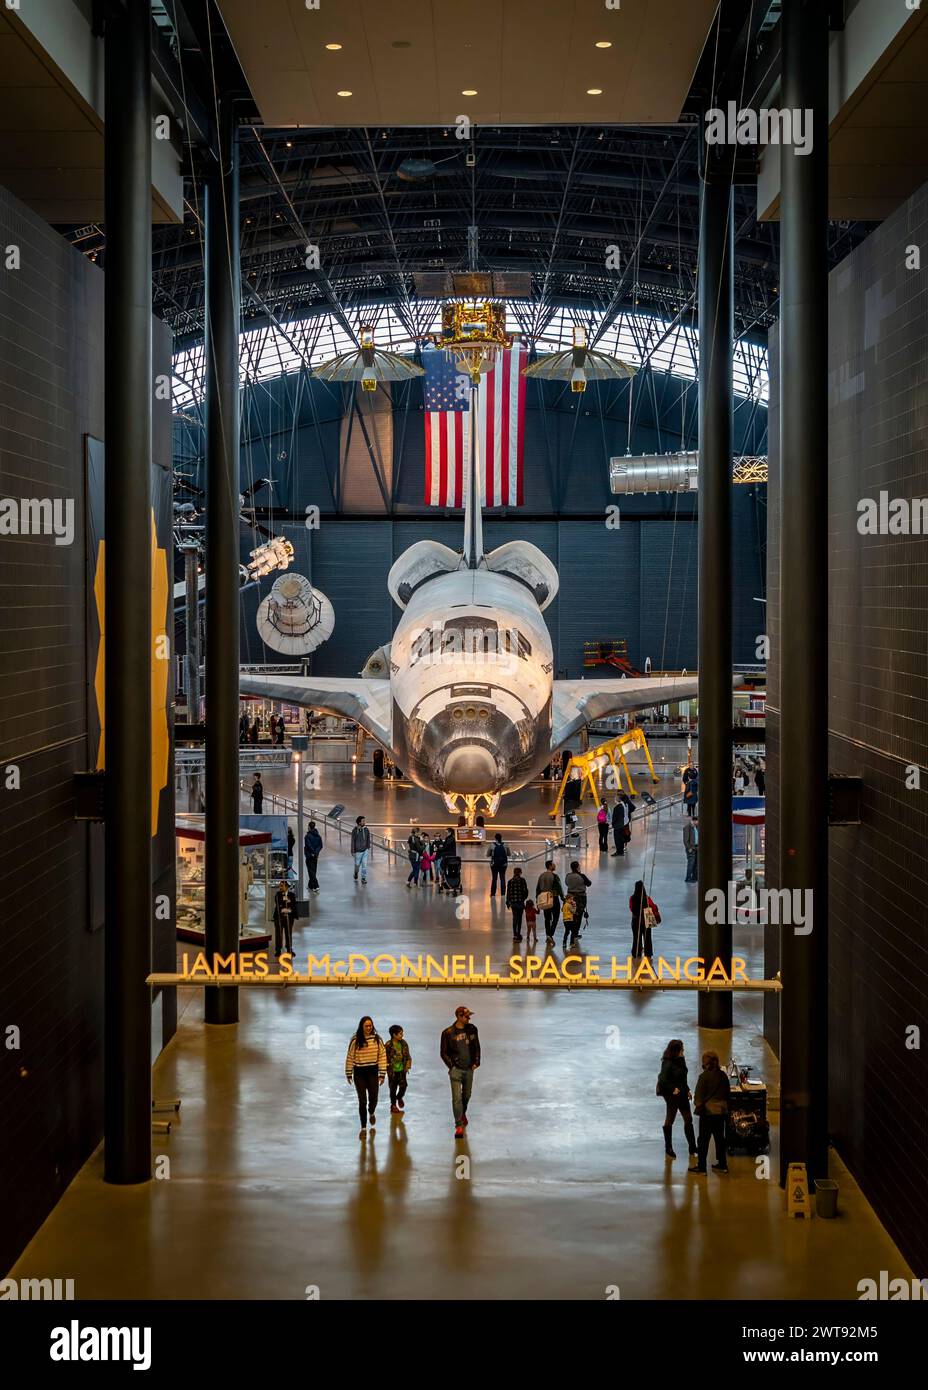 Space Shuttle Discovery on display in the James S. McDonnell Space Hangar at the Steven F. Udvar-Hazy Center. Stock Photo